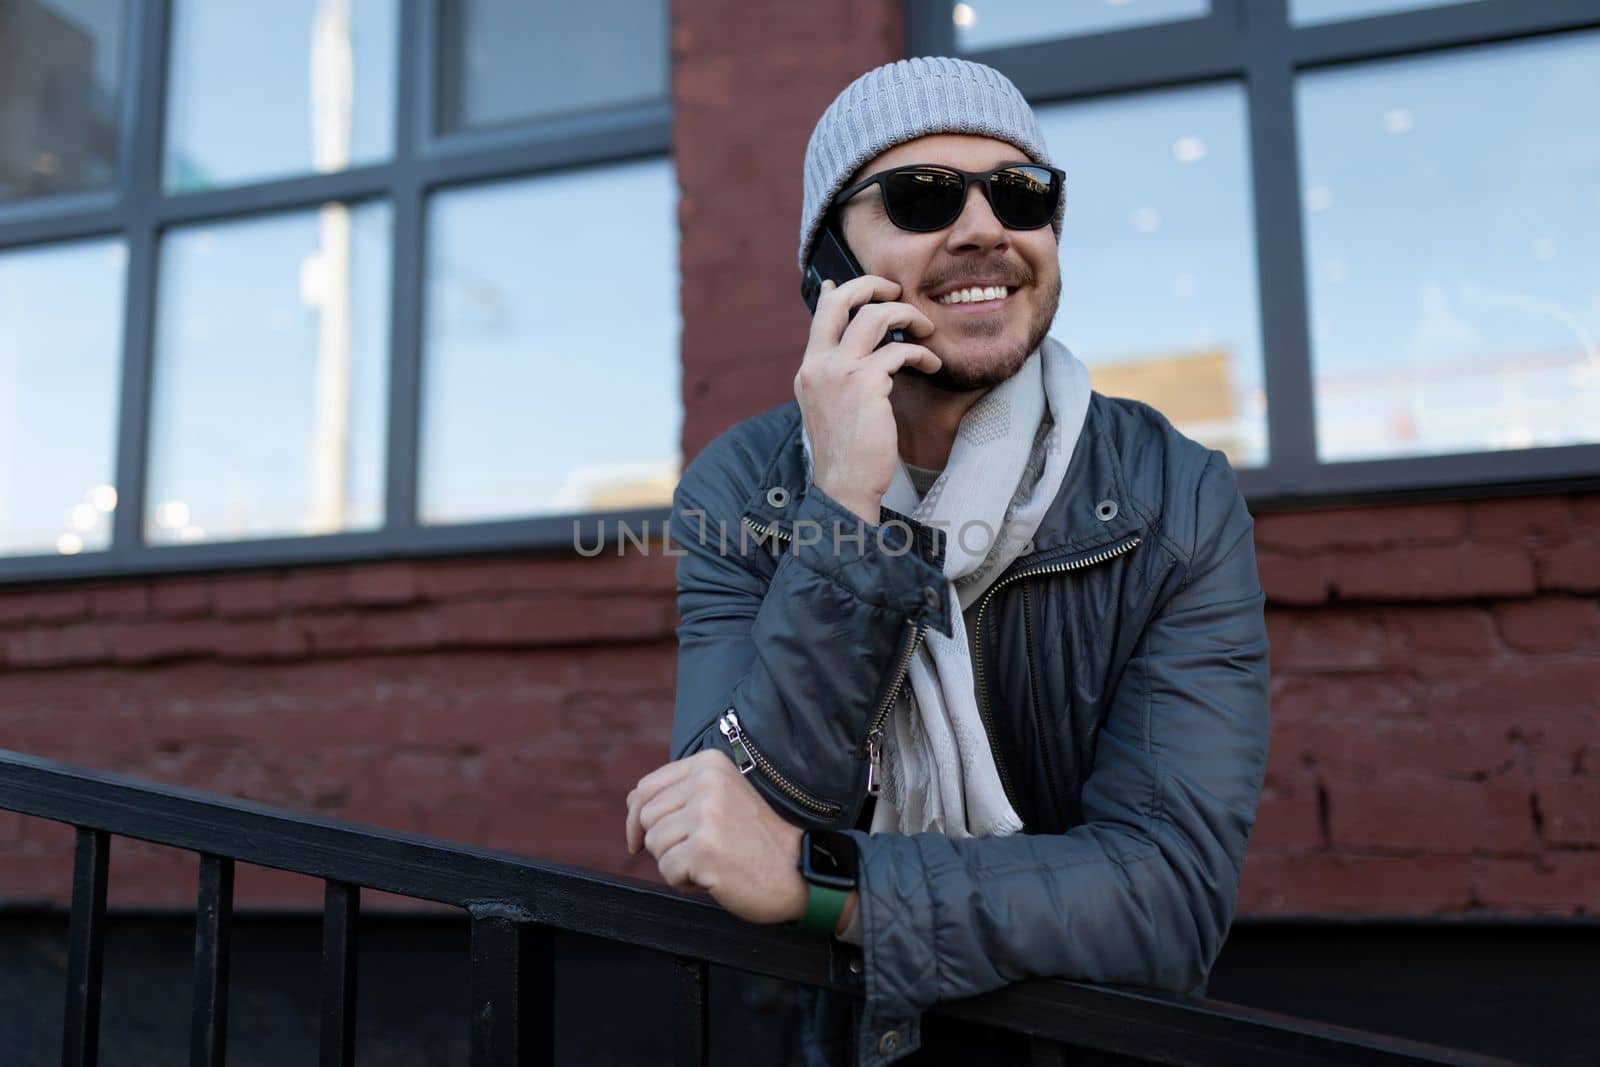 a man in sunglasses and a hat with a scarf speaks with a smile on the phone outside.